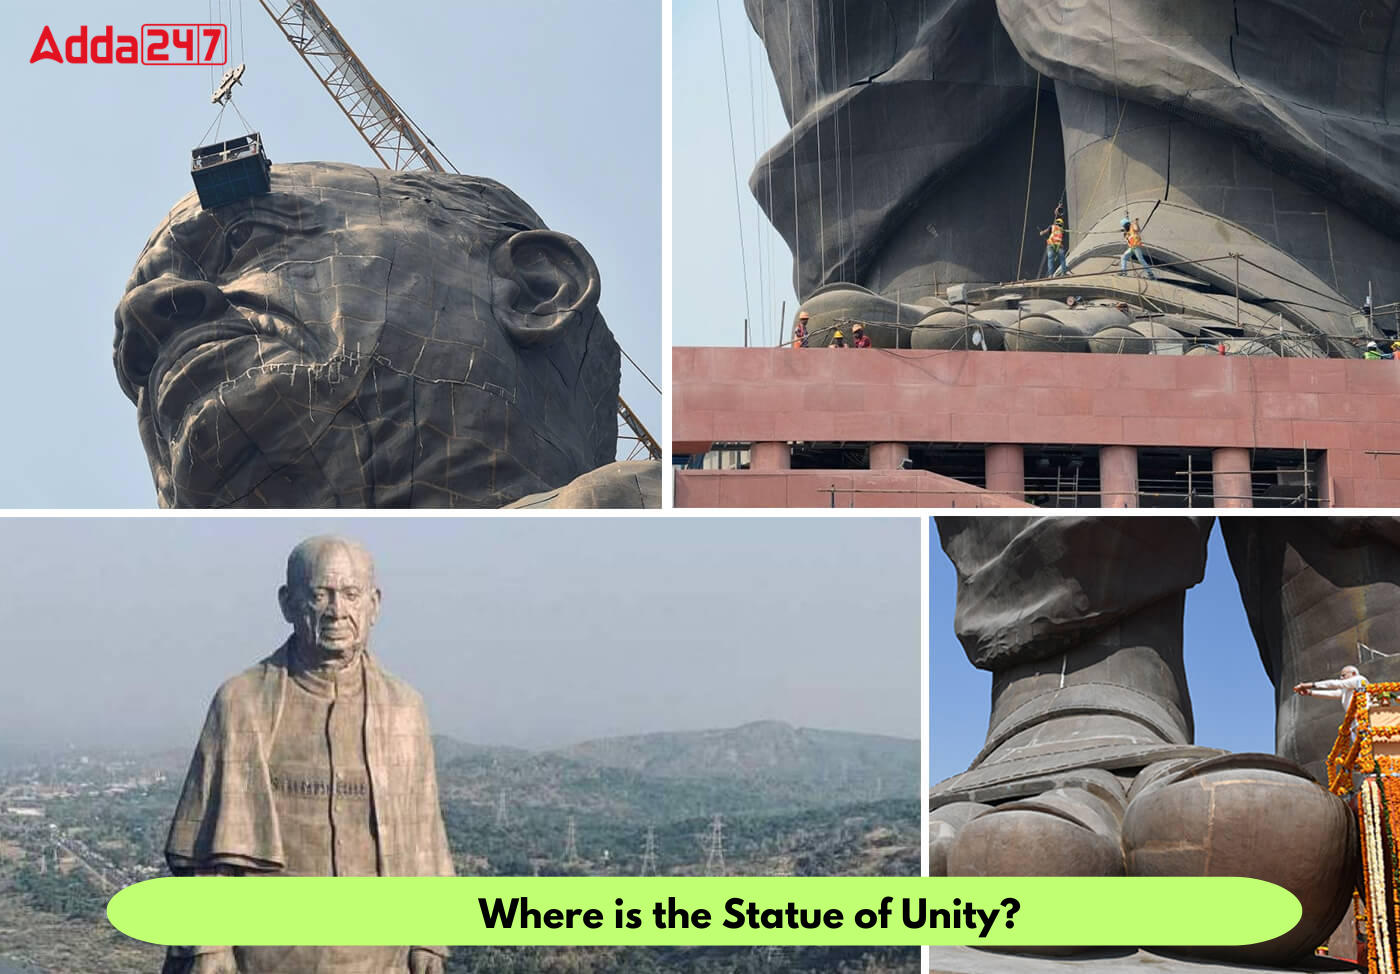 Where is the Statue of Unity?